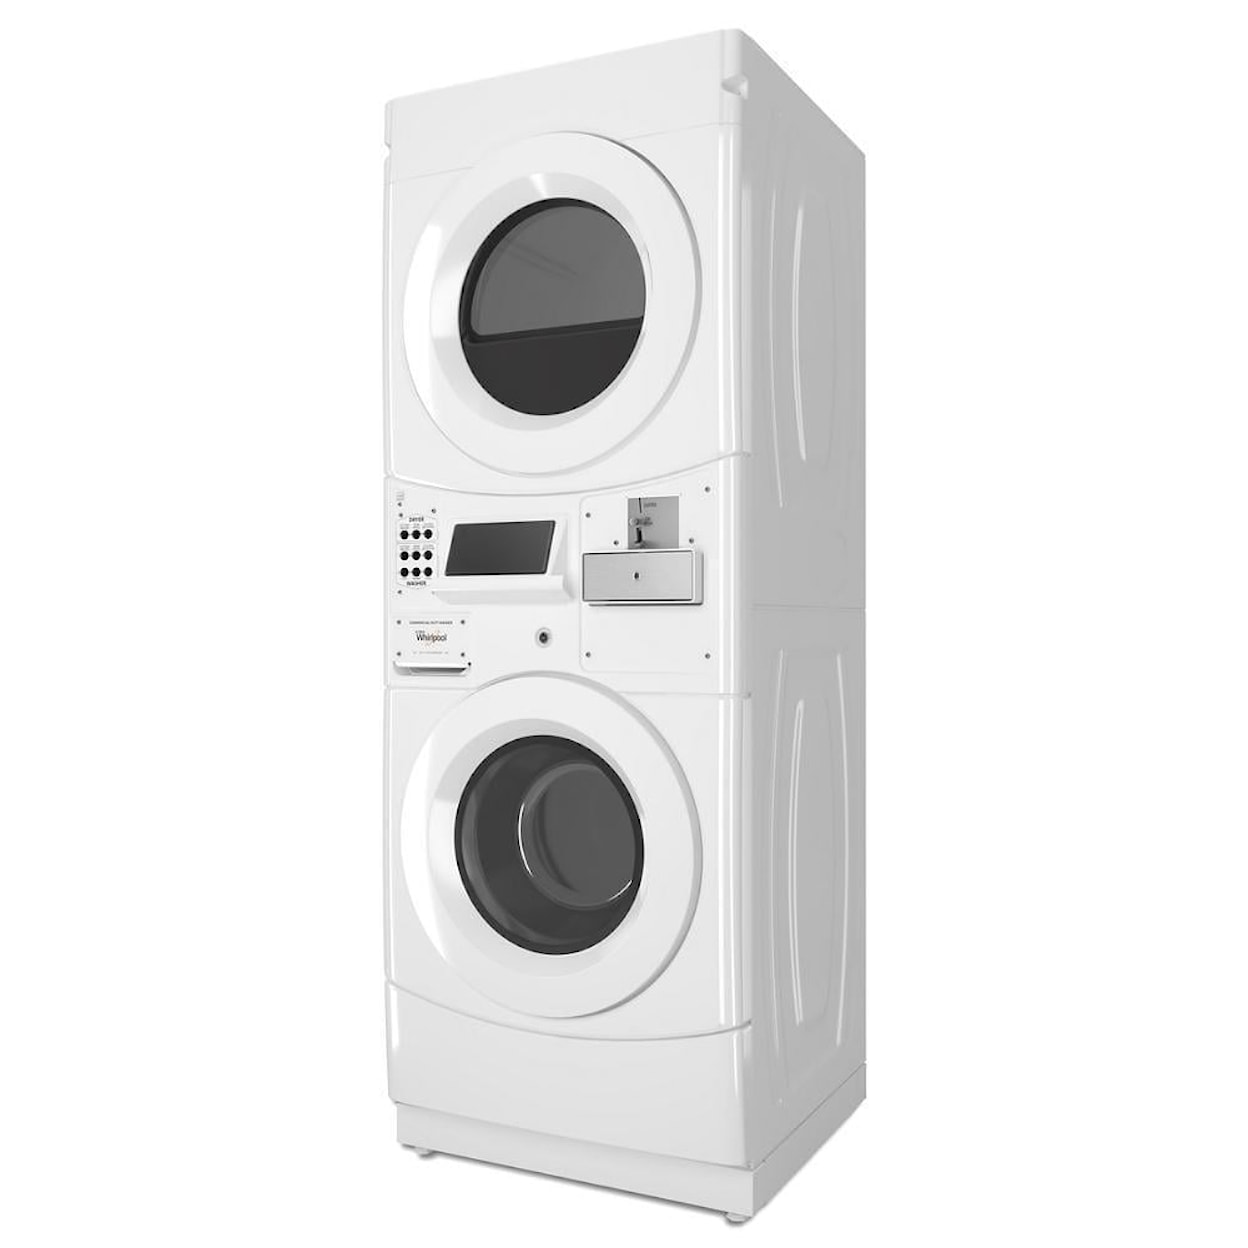 Whirlpool Laundry Commercial Combination Washer And Dryer